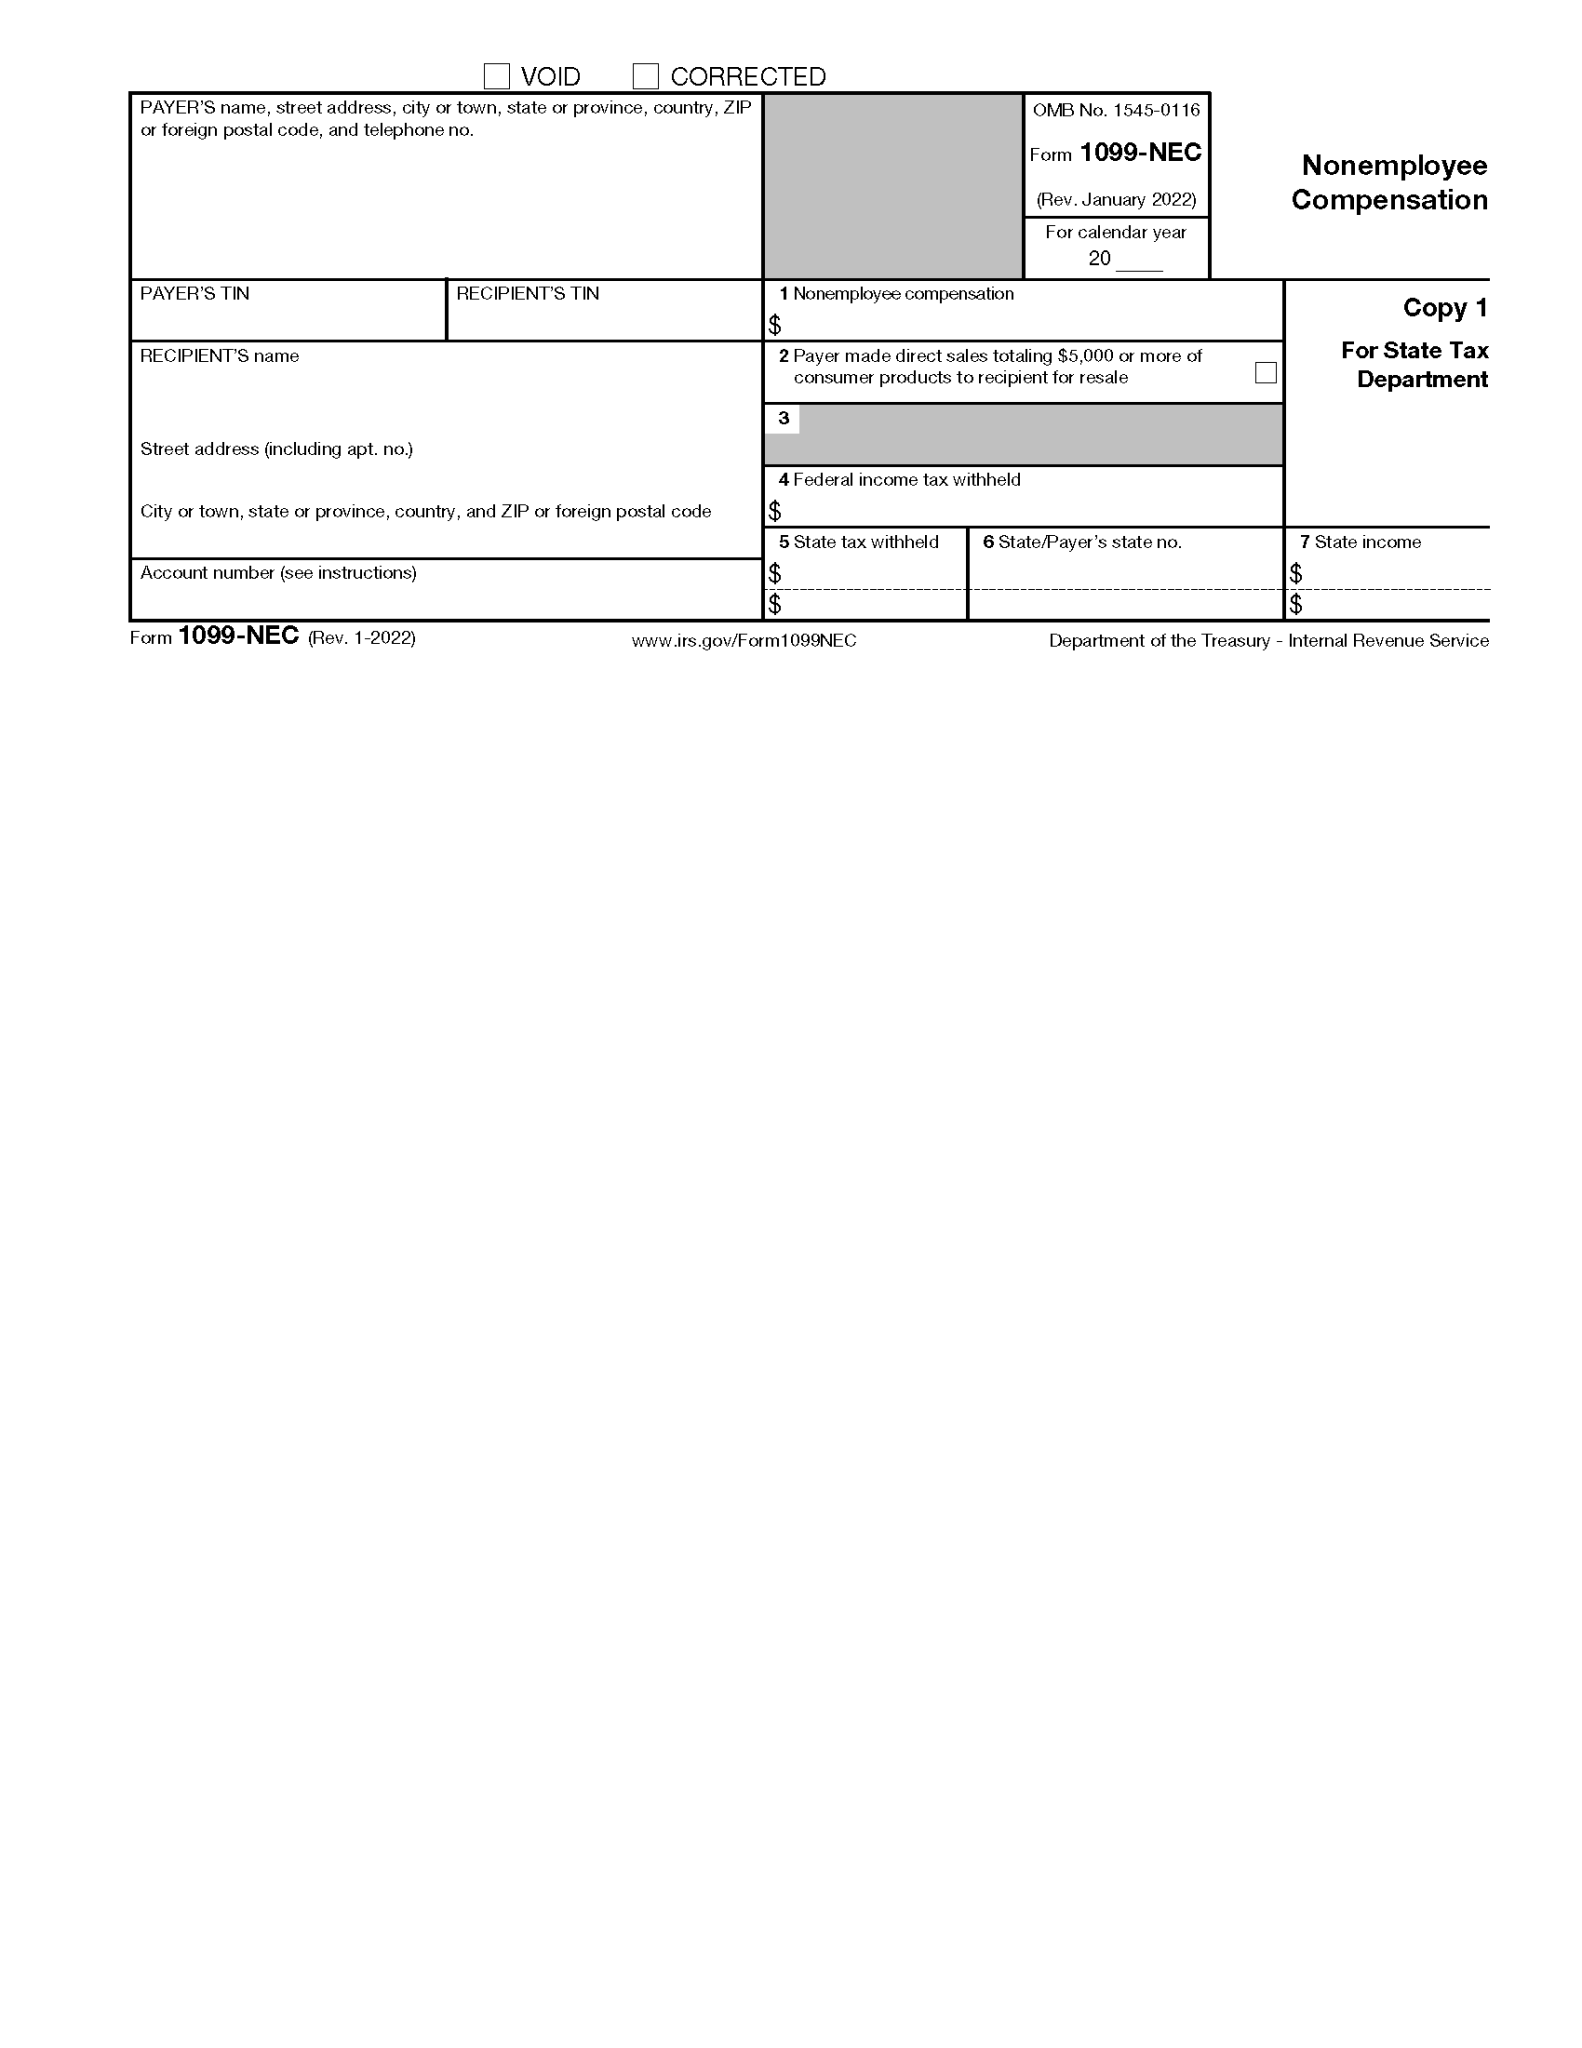 IRS Tax Forms eForms